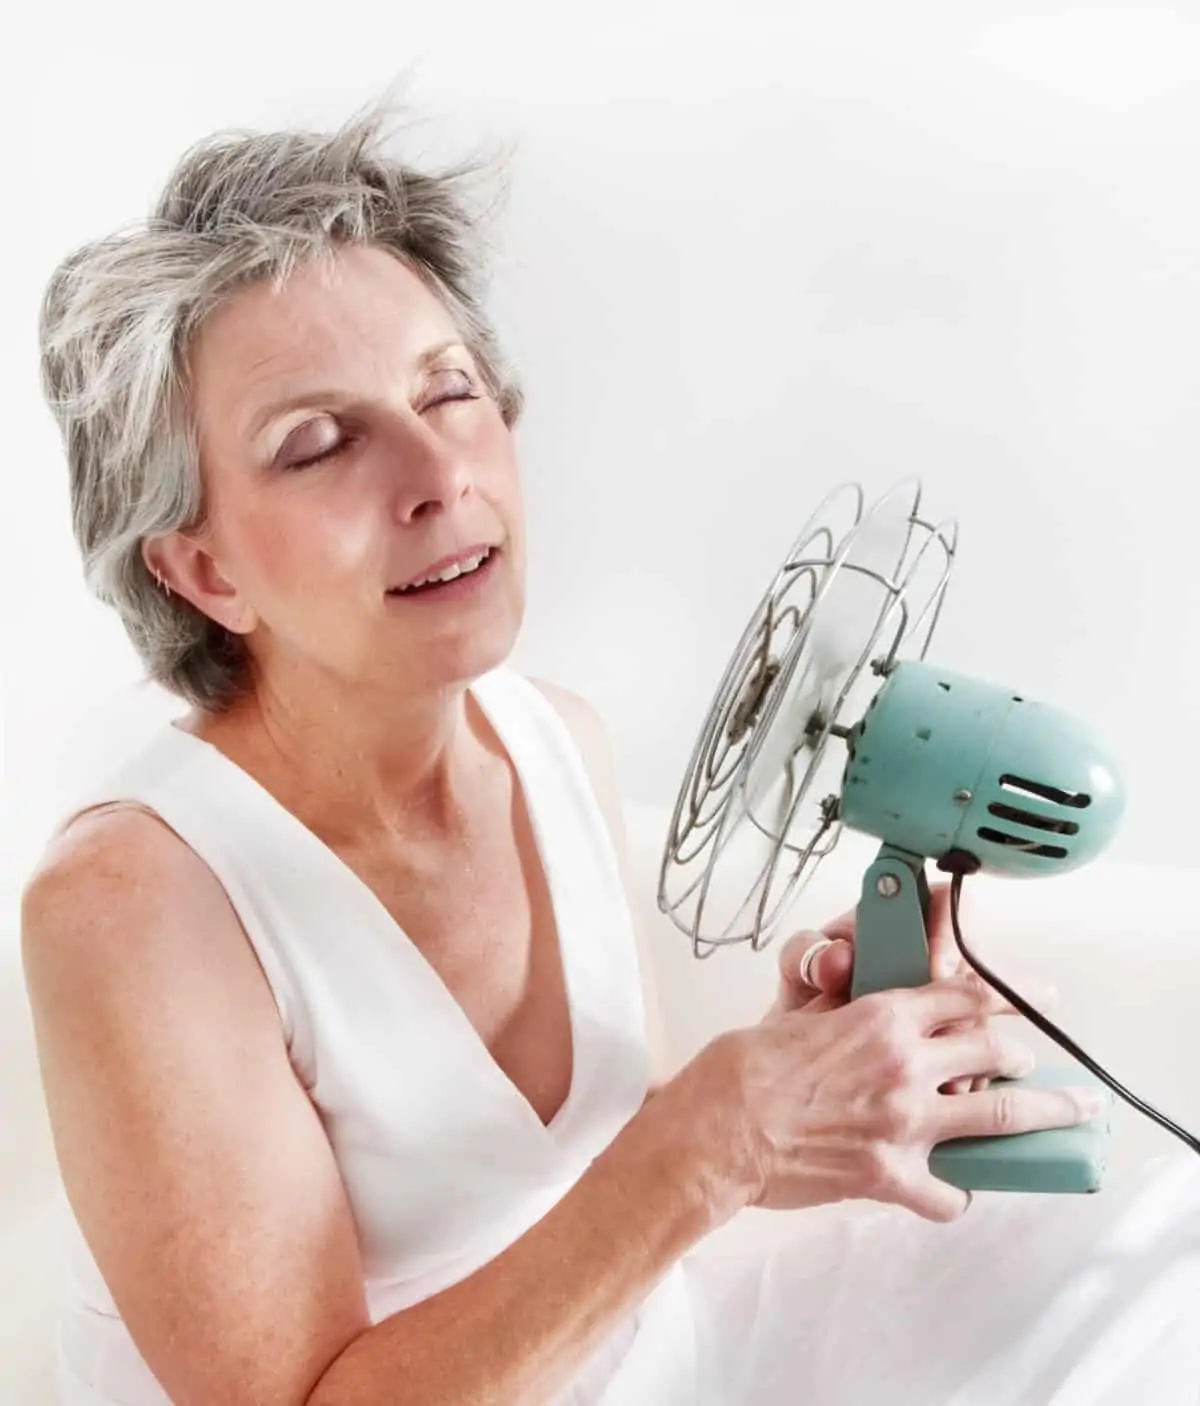 Menopausal woman using fan to cool down during a hot flash